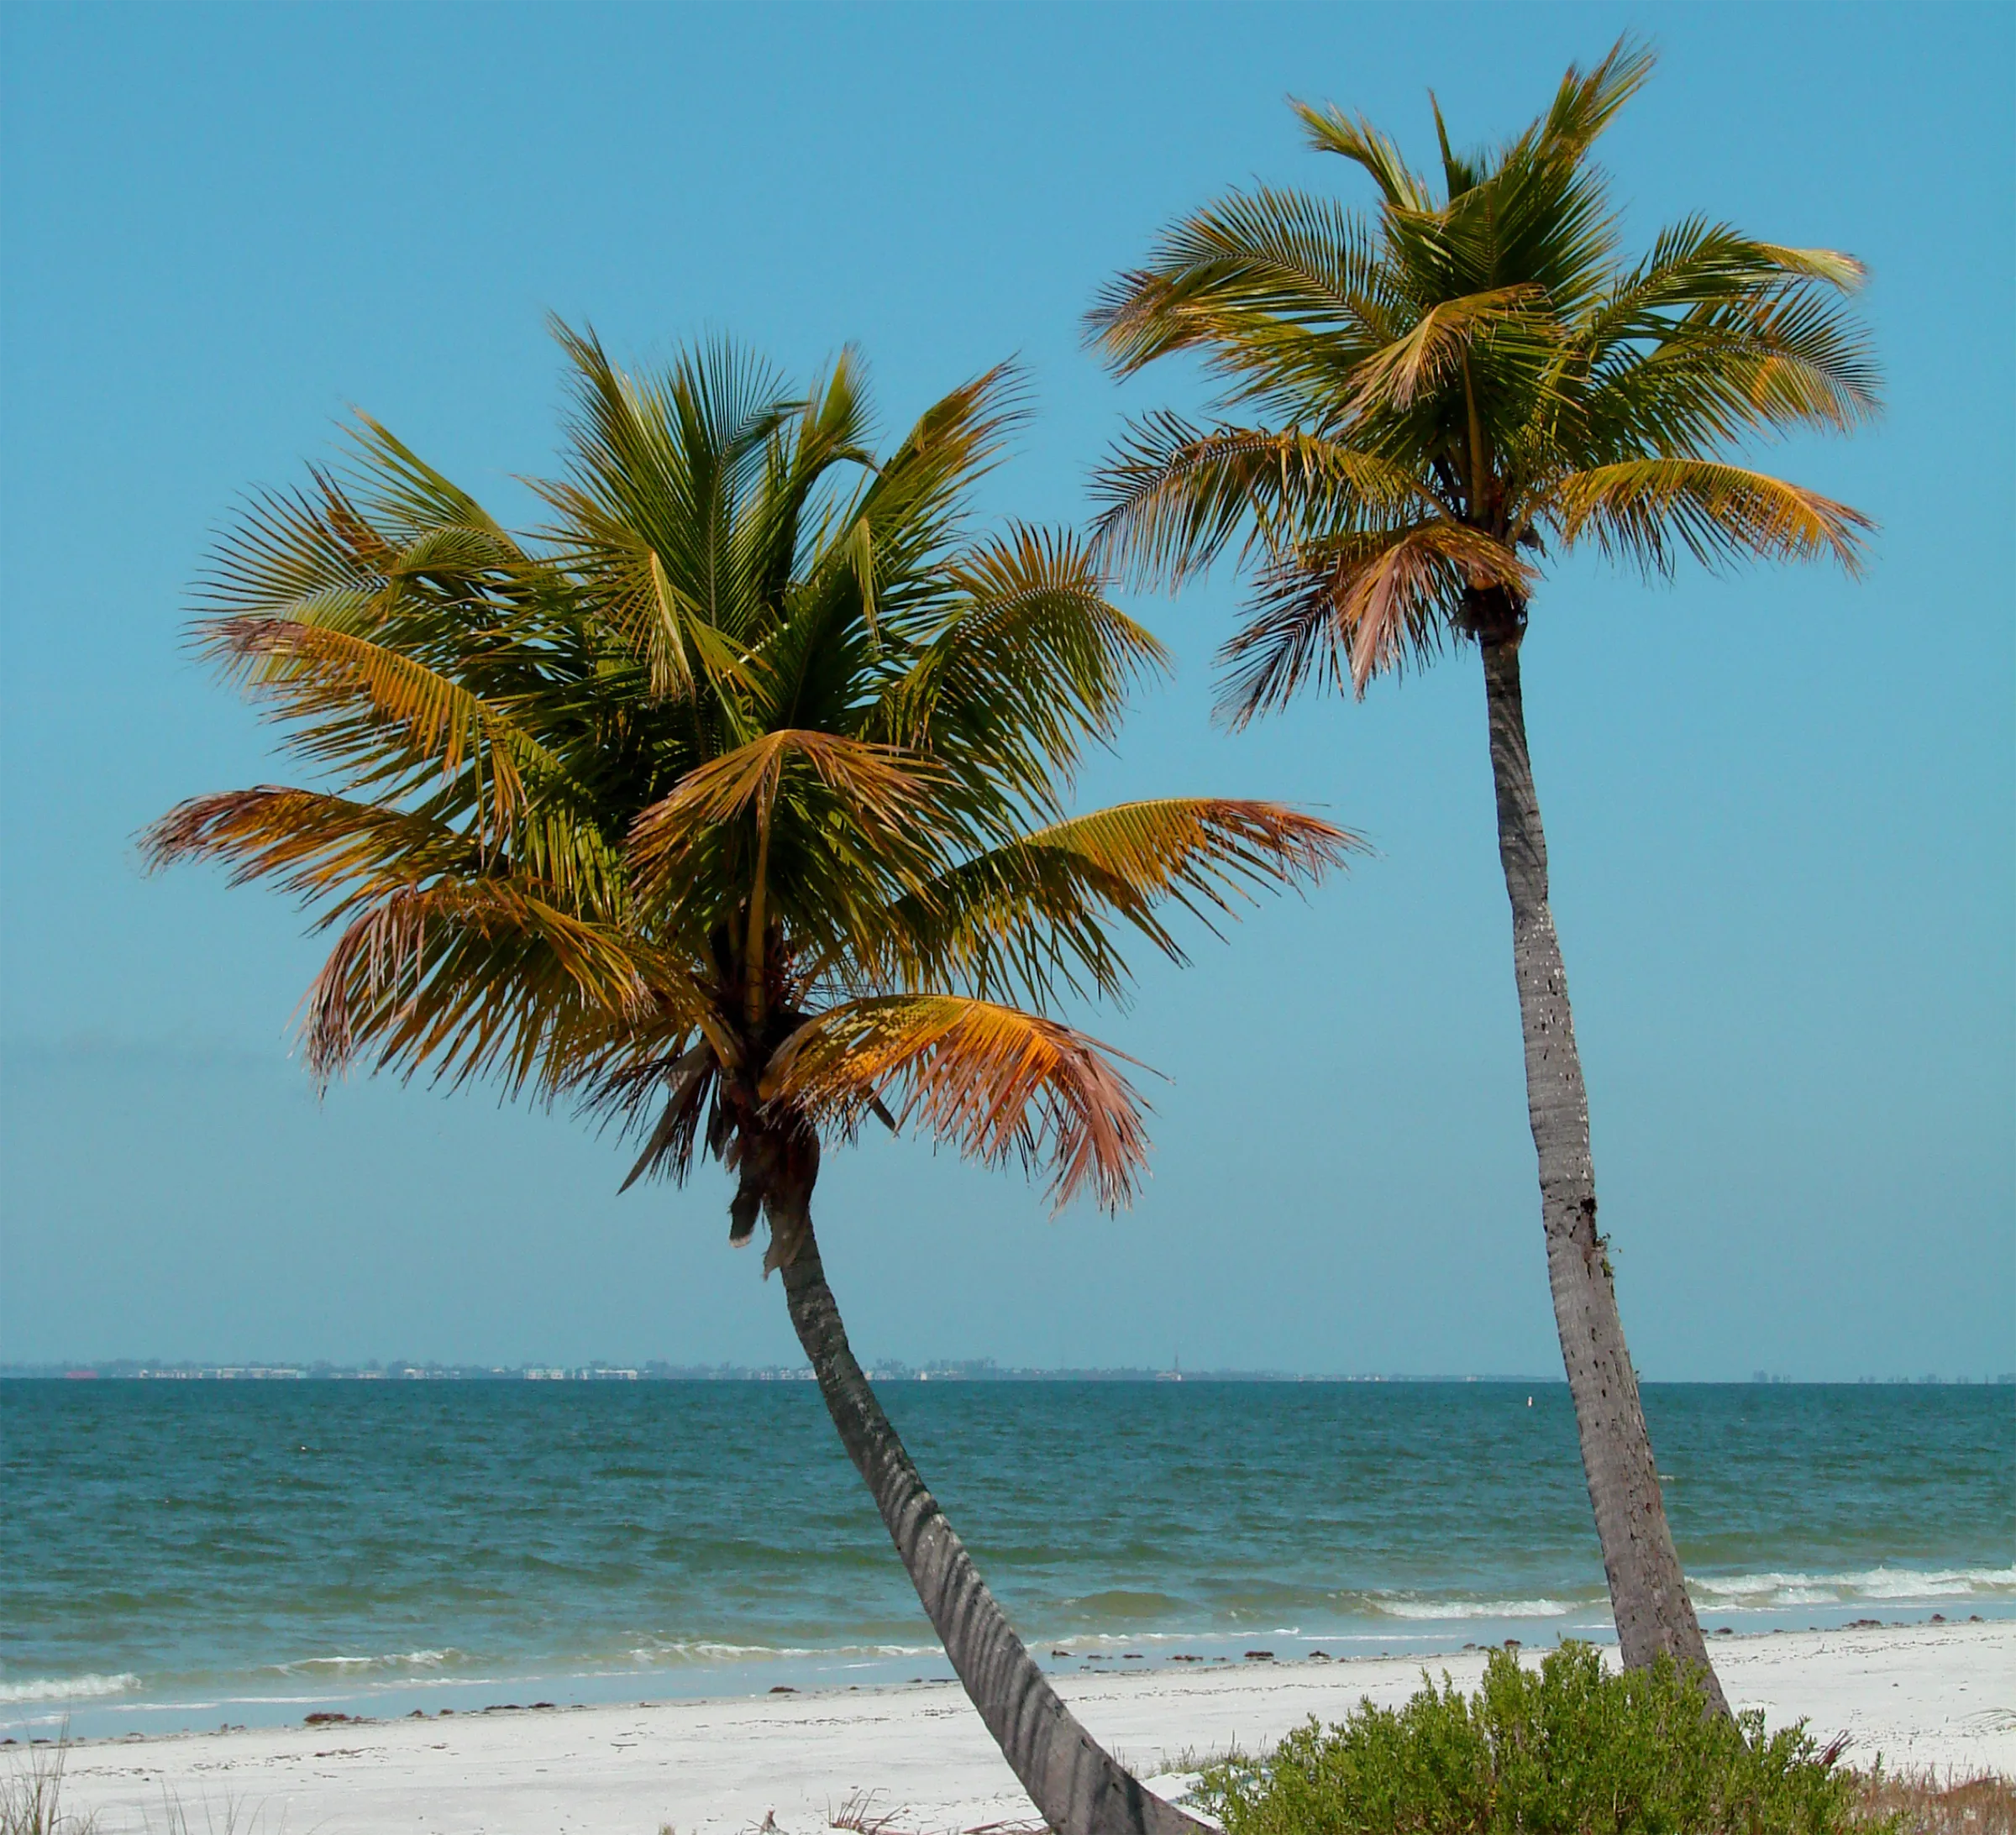 Two palm trees on a beach in Florida with the ocean in the background.